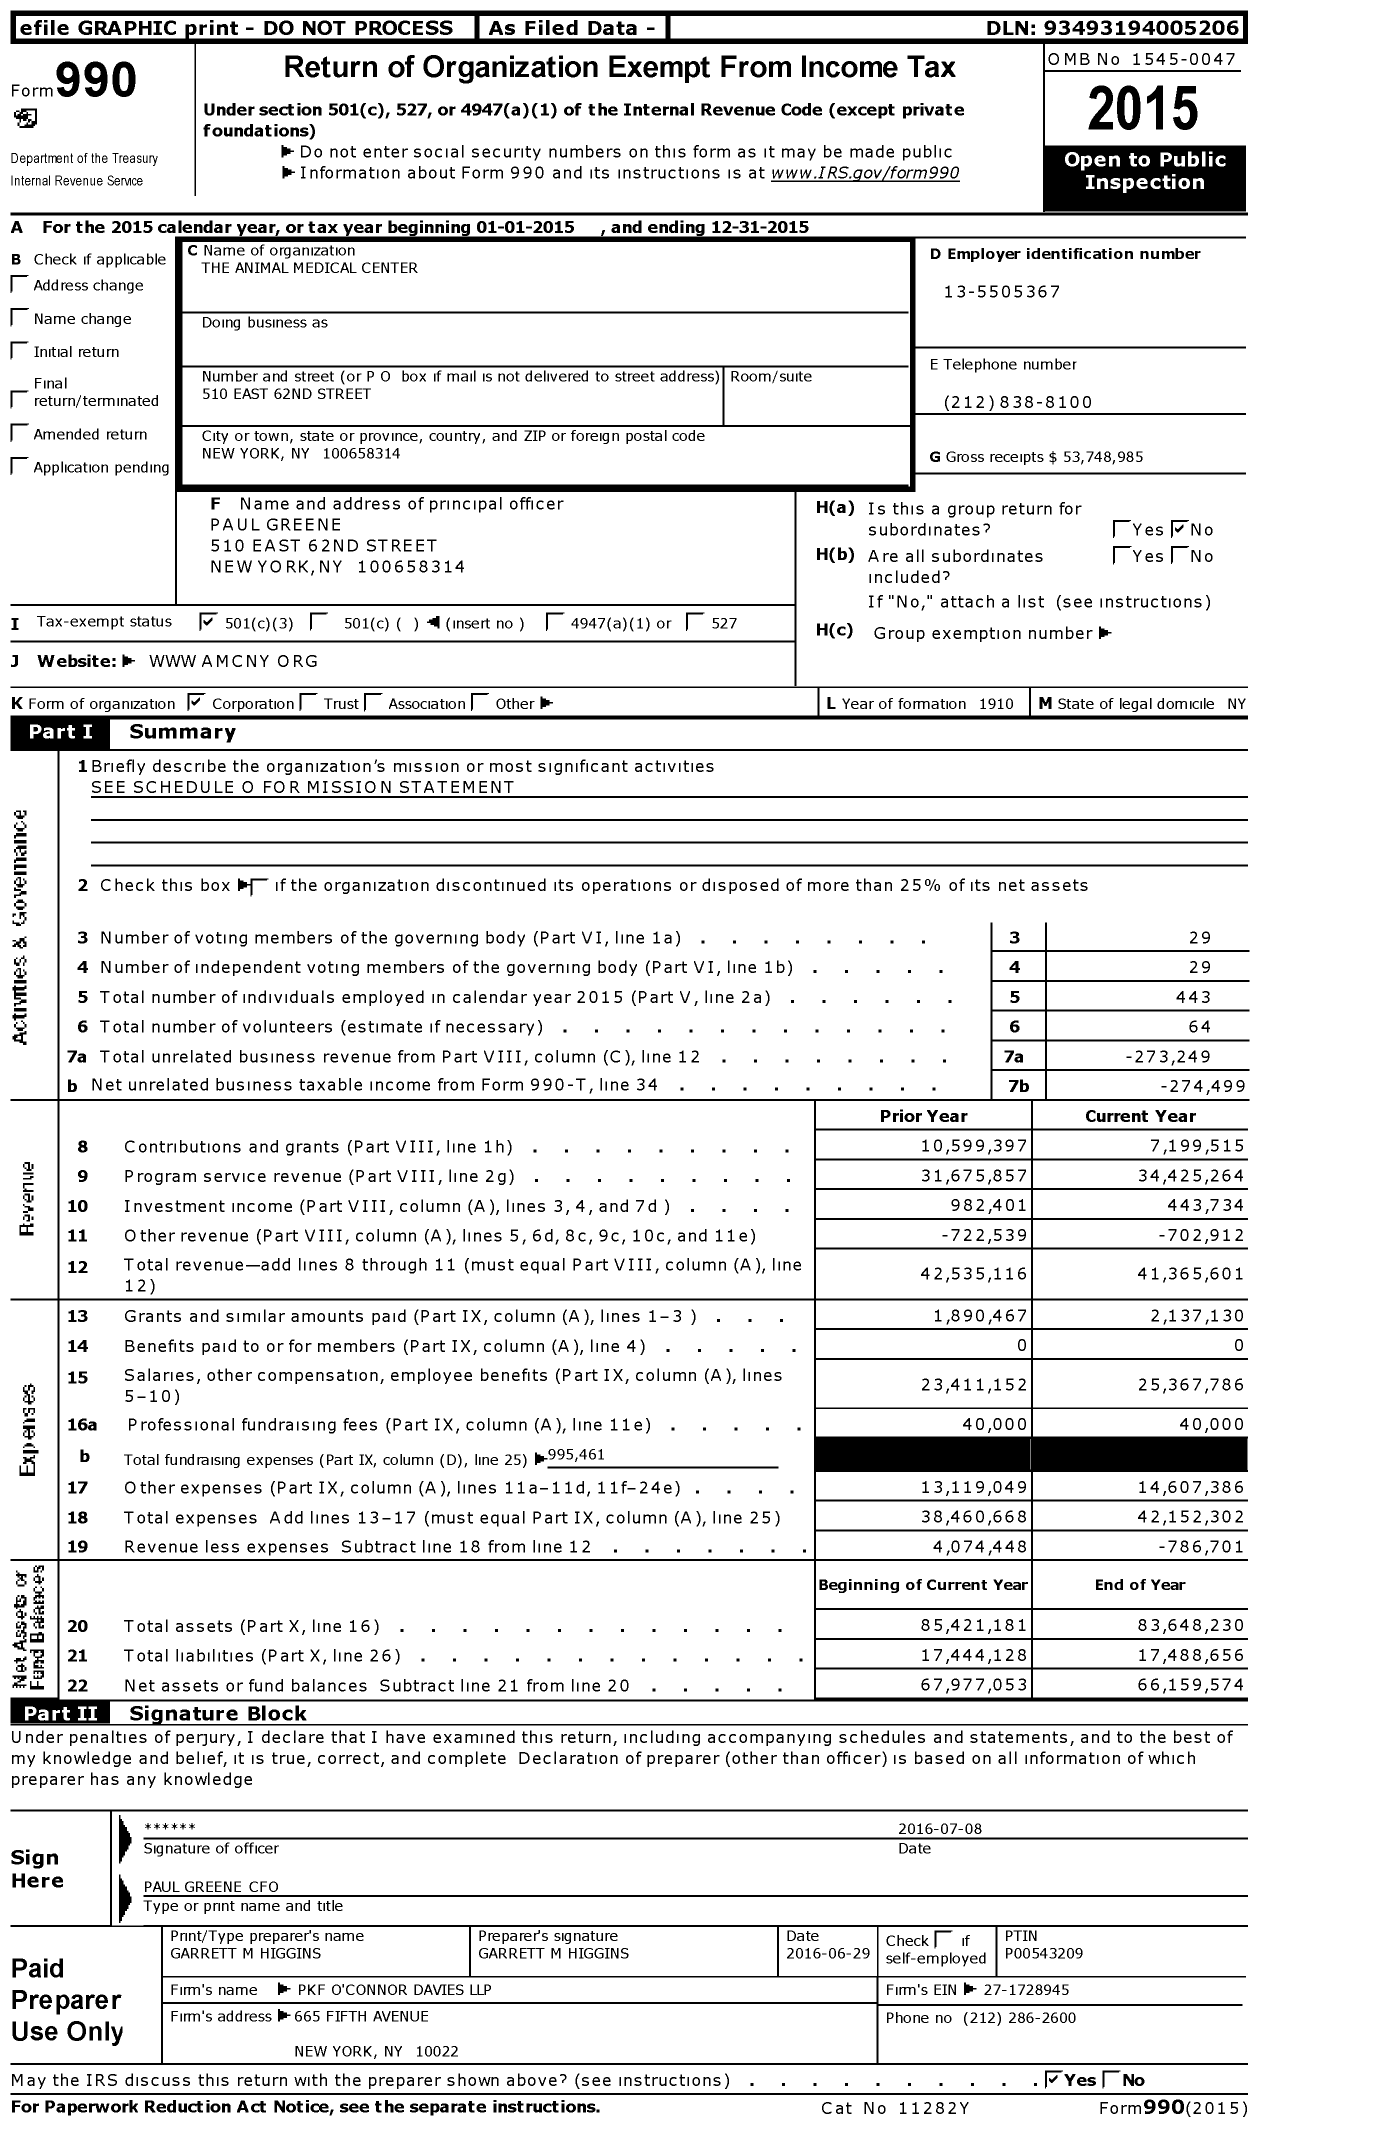 Image of first page of 2015 Form 990 for Stephen and Christine Schwarzman Animal Medical Center (AMC)